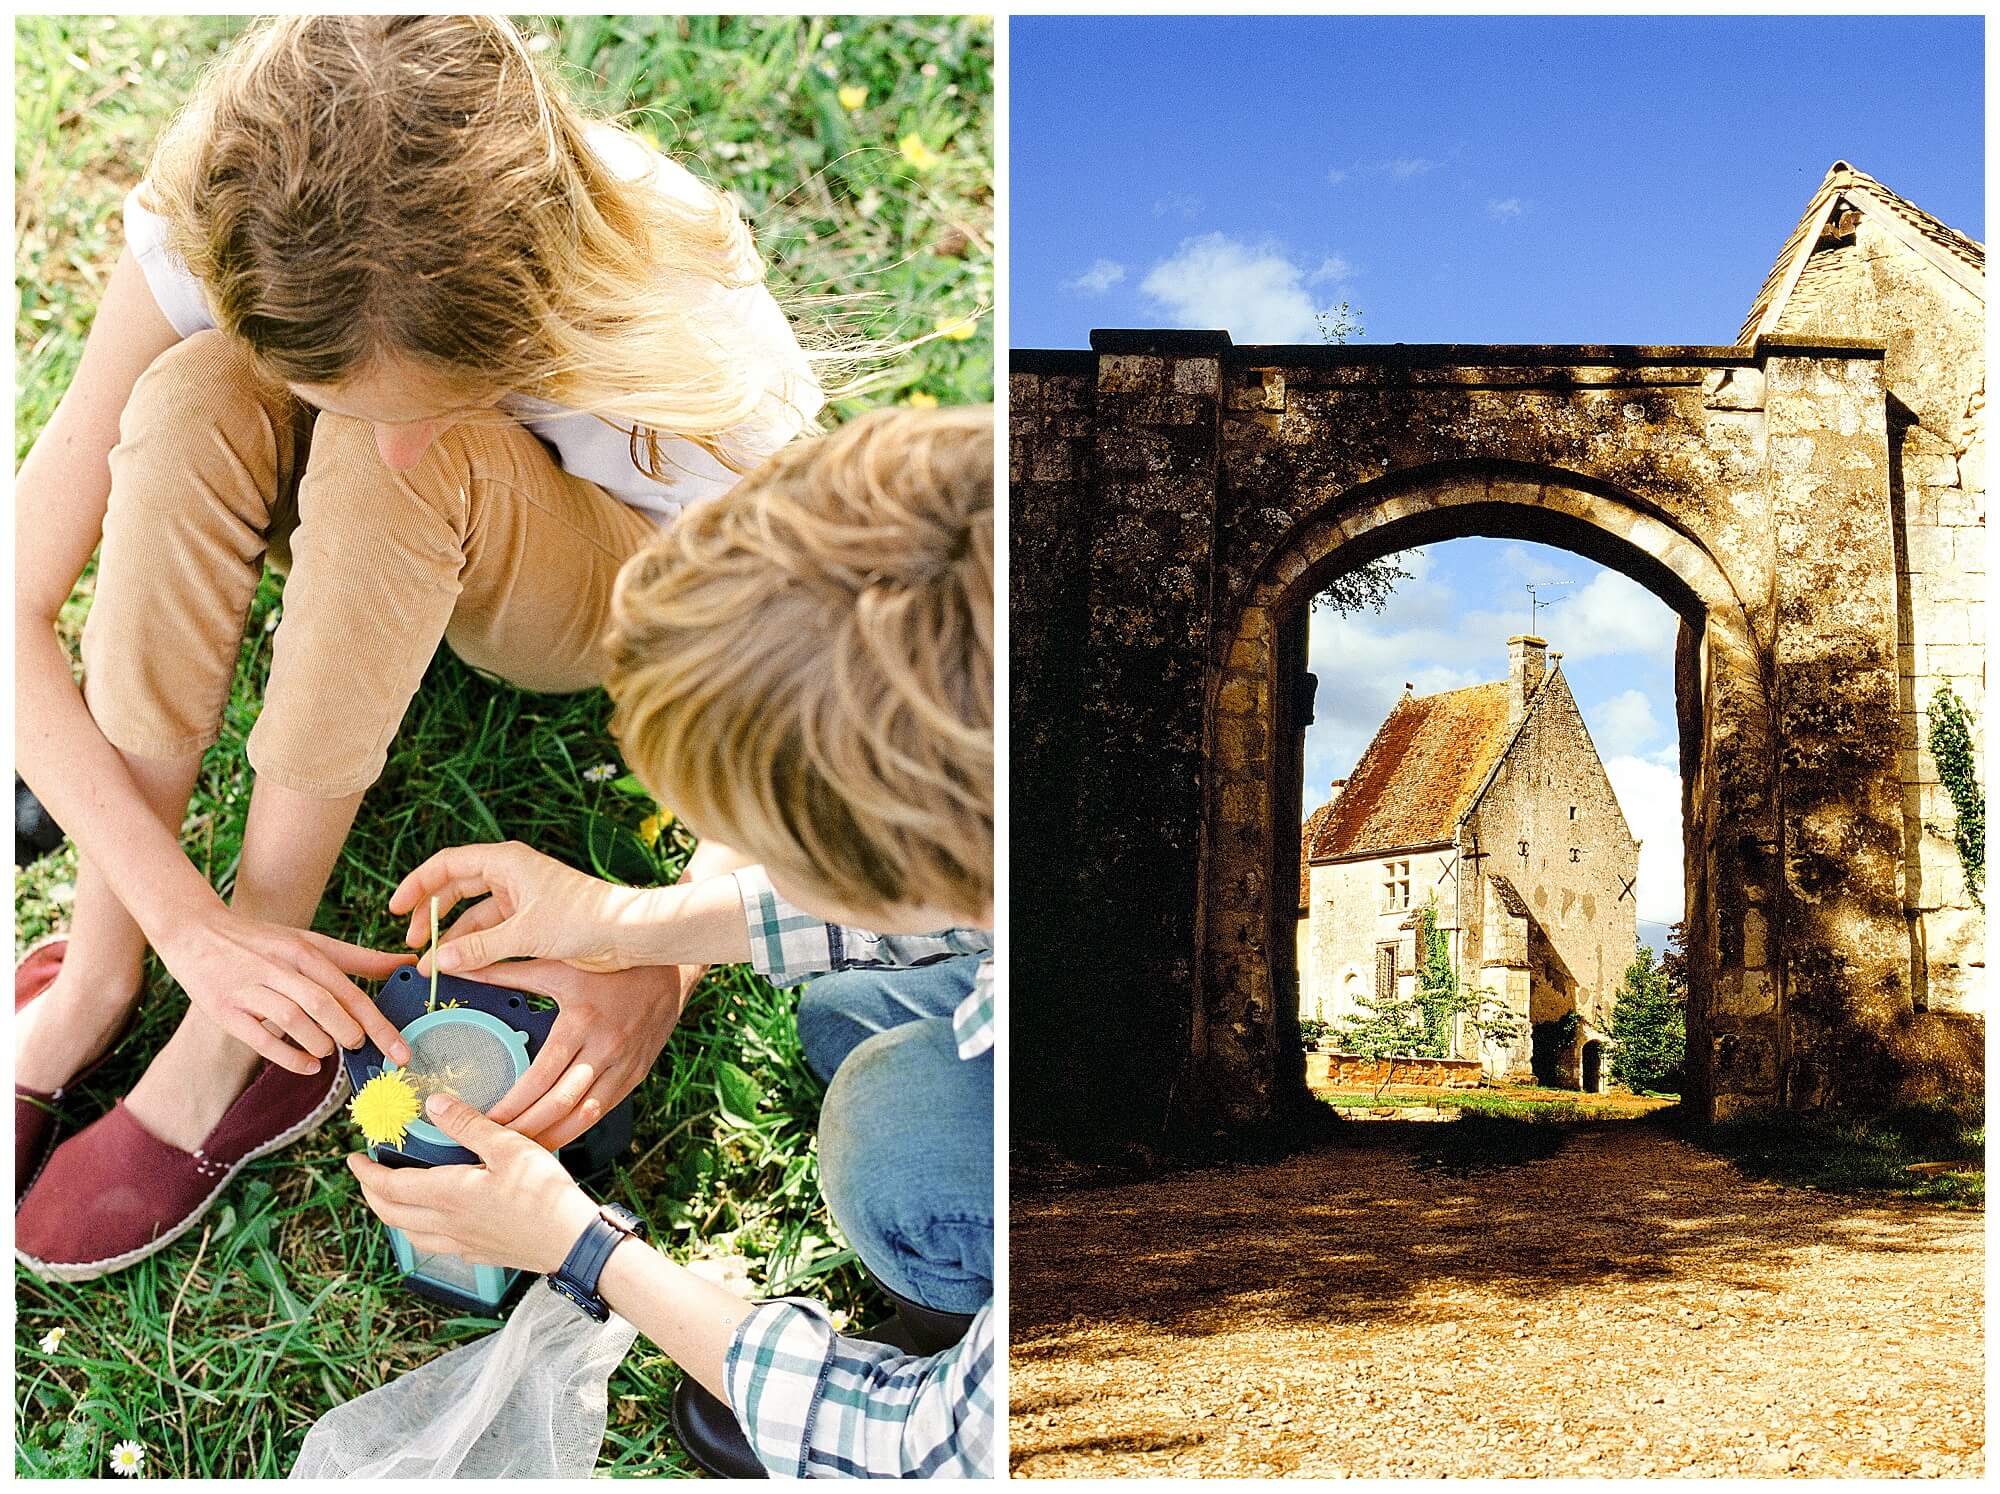 Left: Two French children peer into a butterfly cage in the countryside during the COVID 19 quarantine. Right: A manor house in the French countryside.